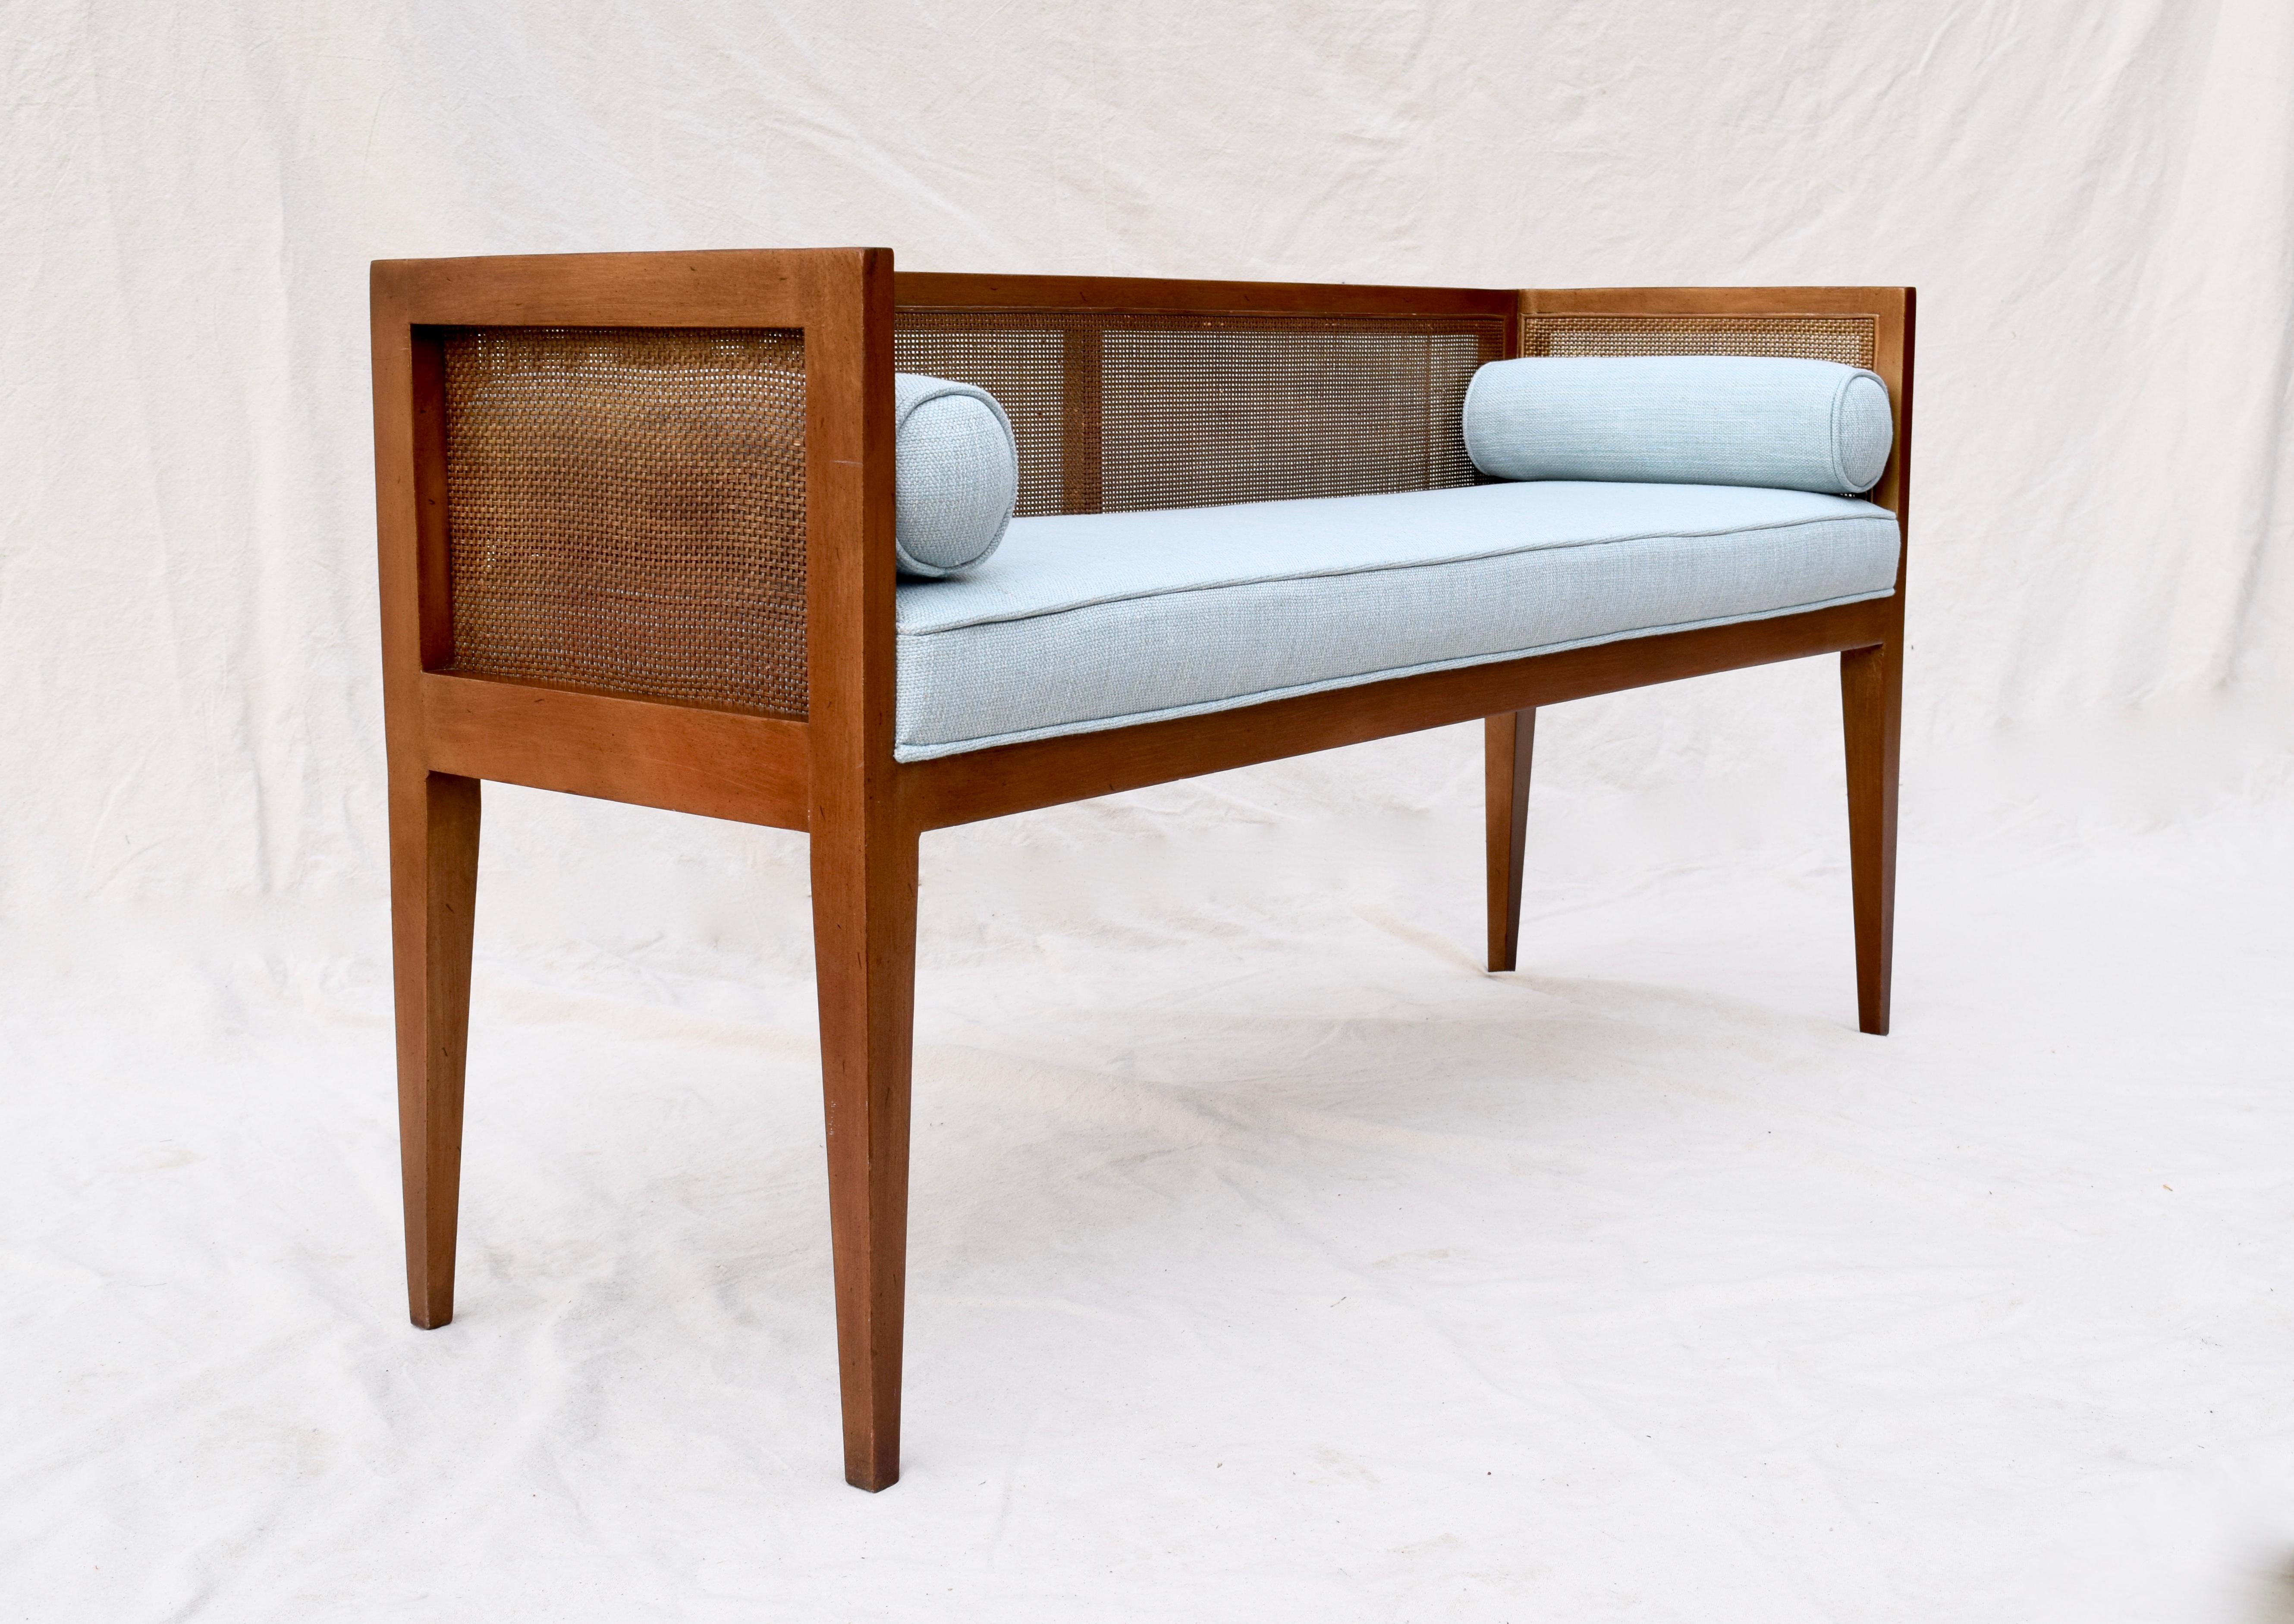 North American 1950s Mahogany Window Bench Attributed to Edward Wormley for Dunbar